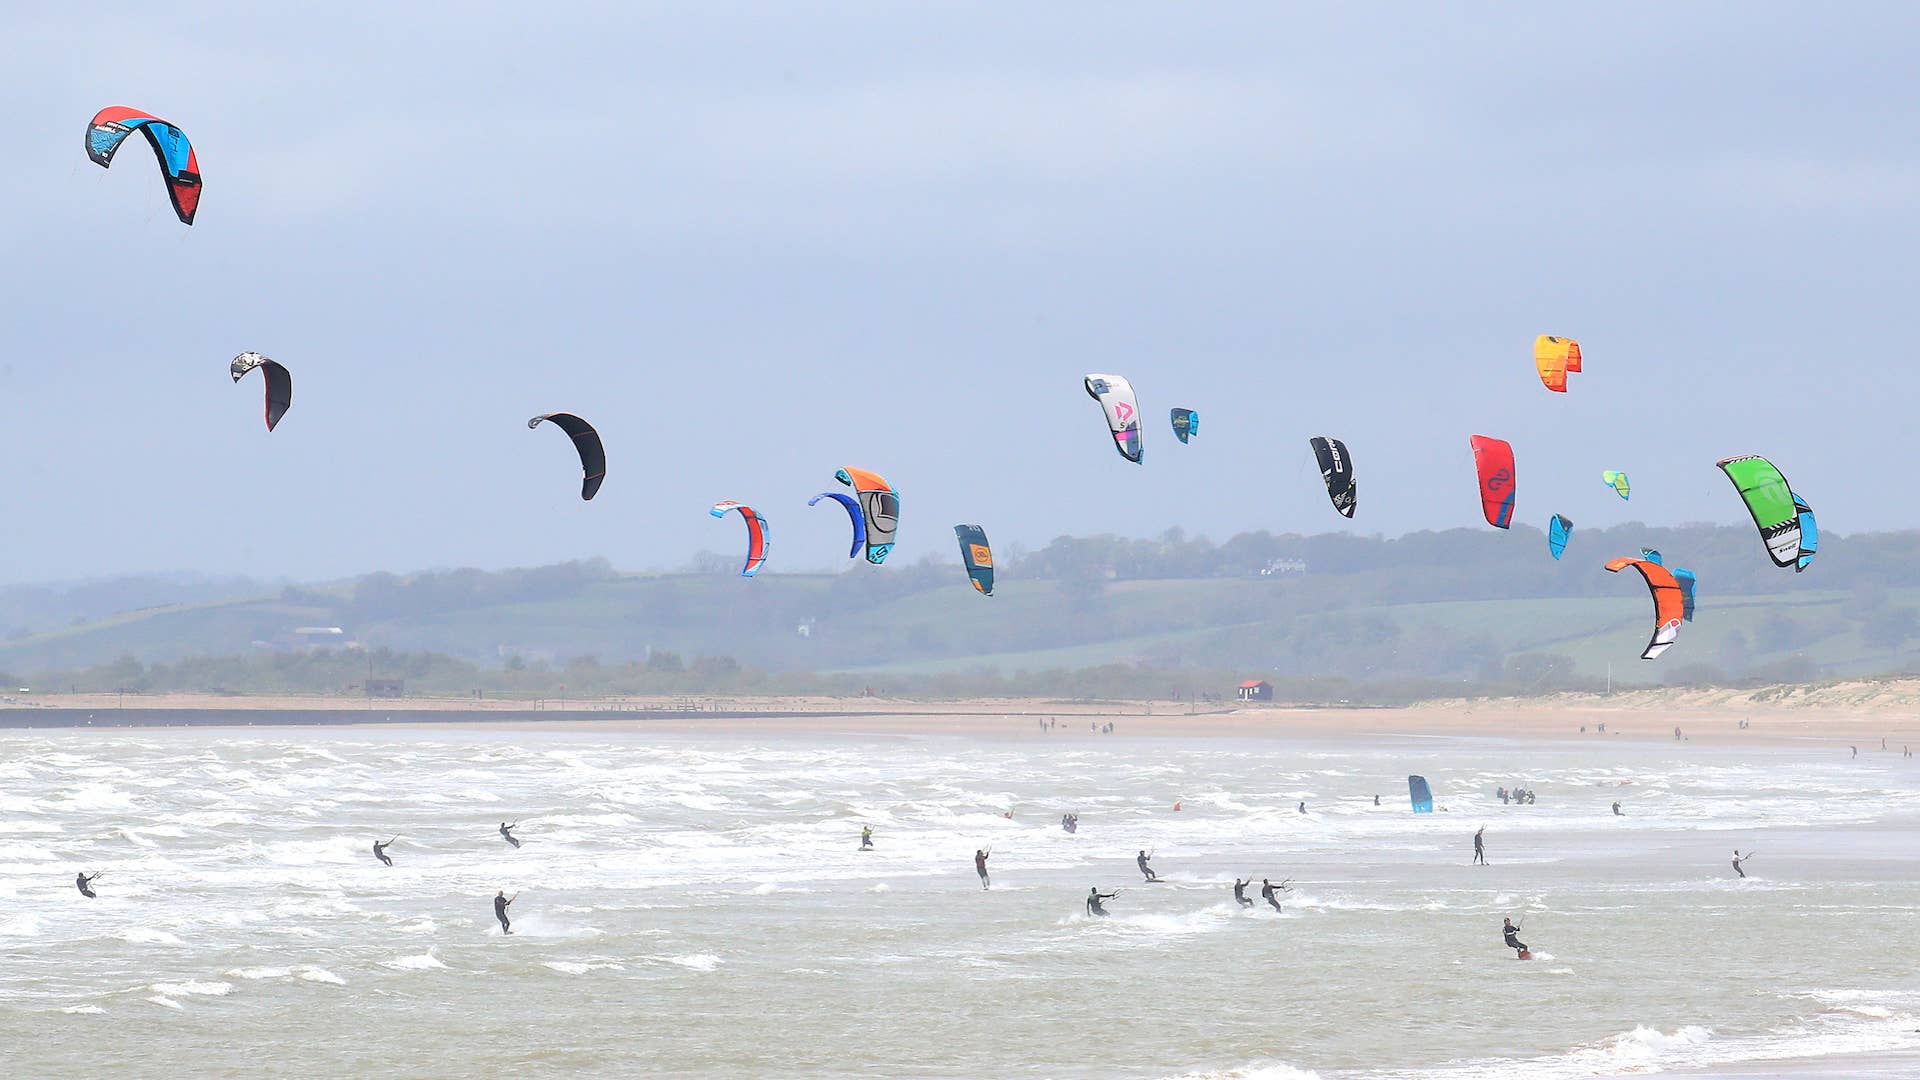 Kitesurfers enjoy with windy conditions in Camber, East Sussex